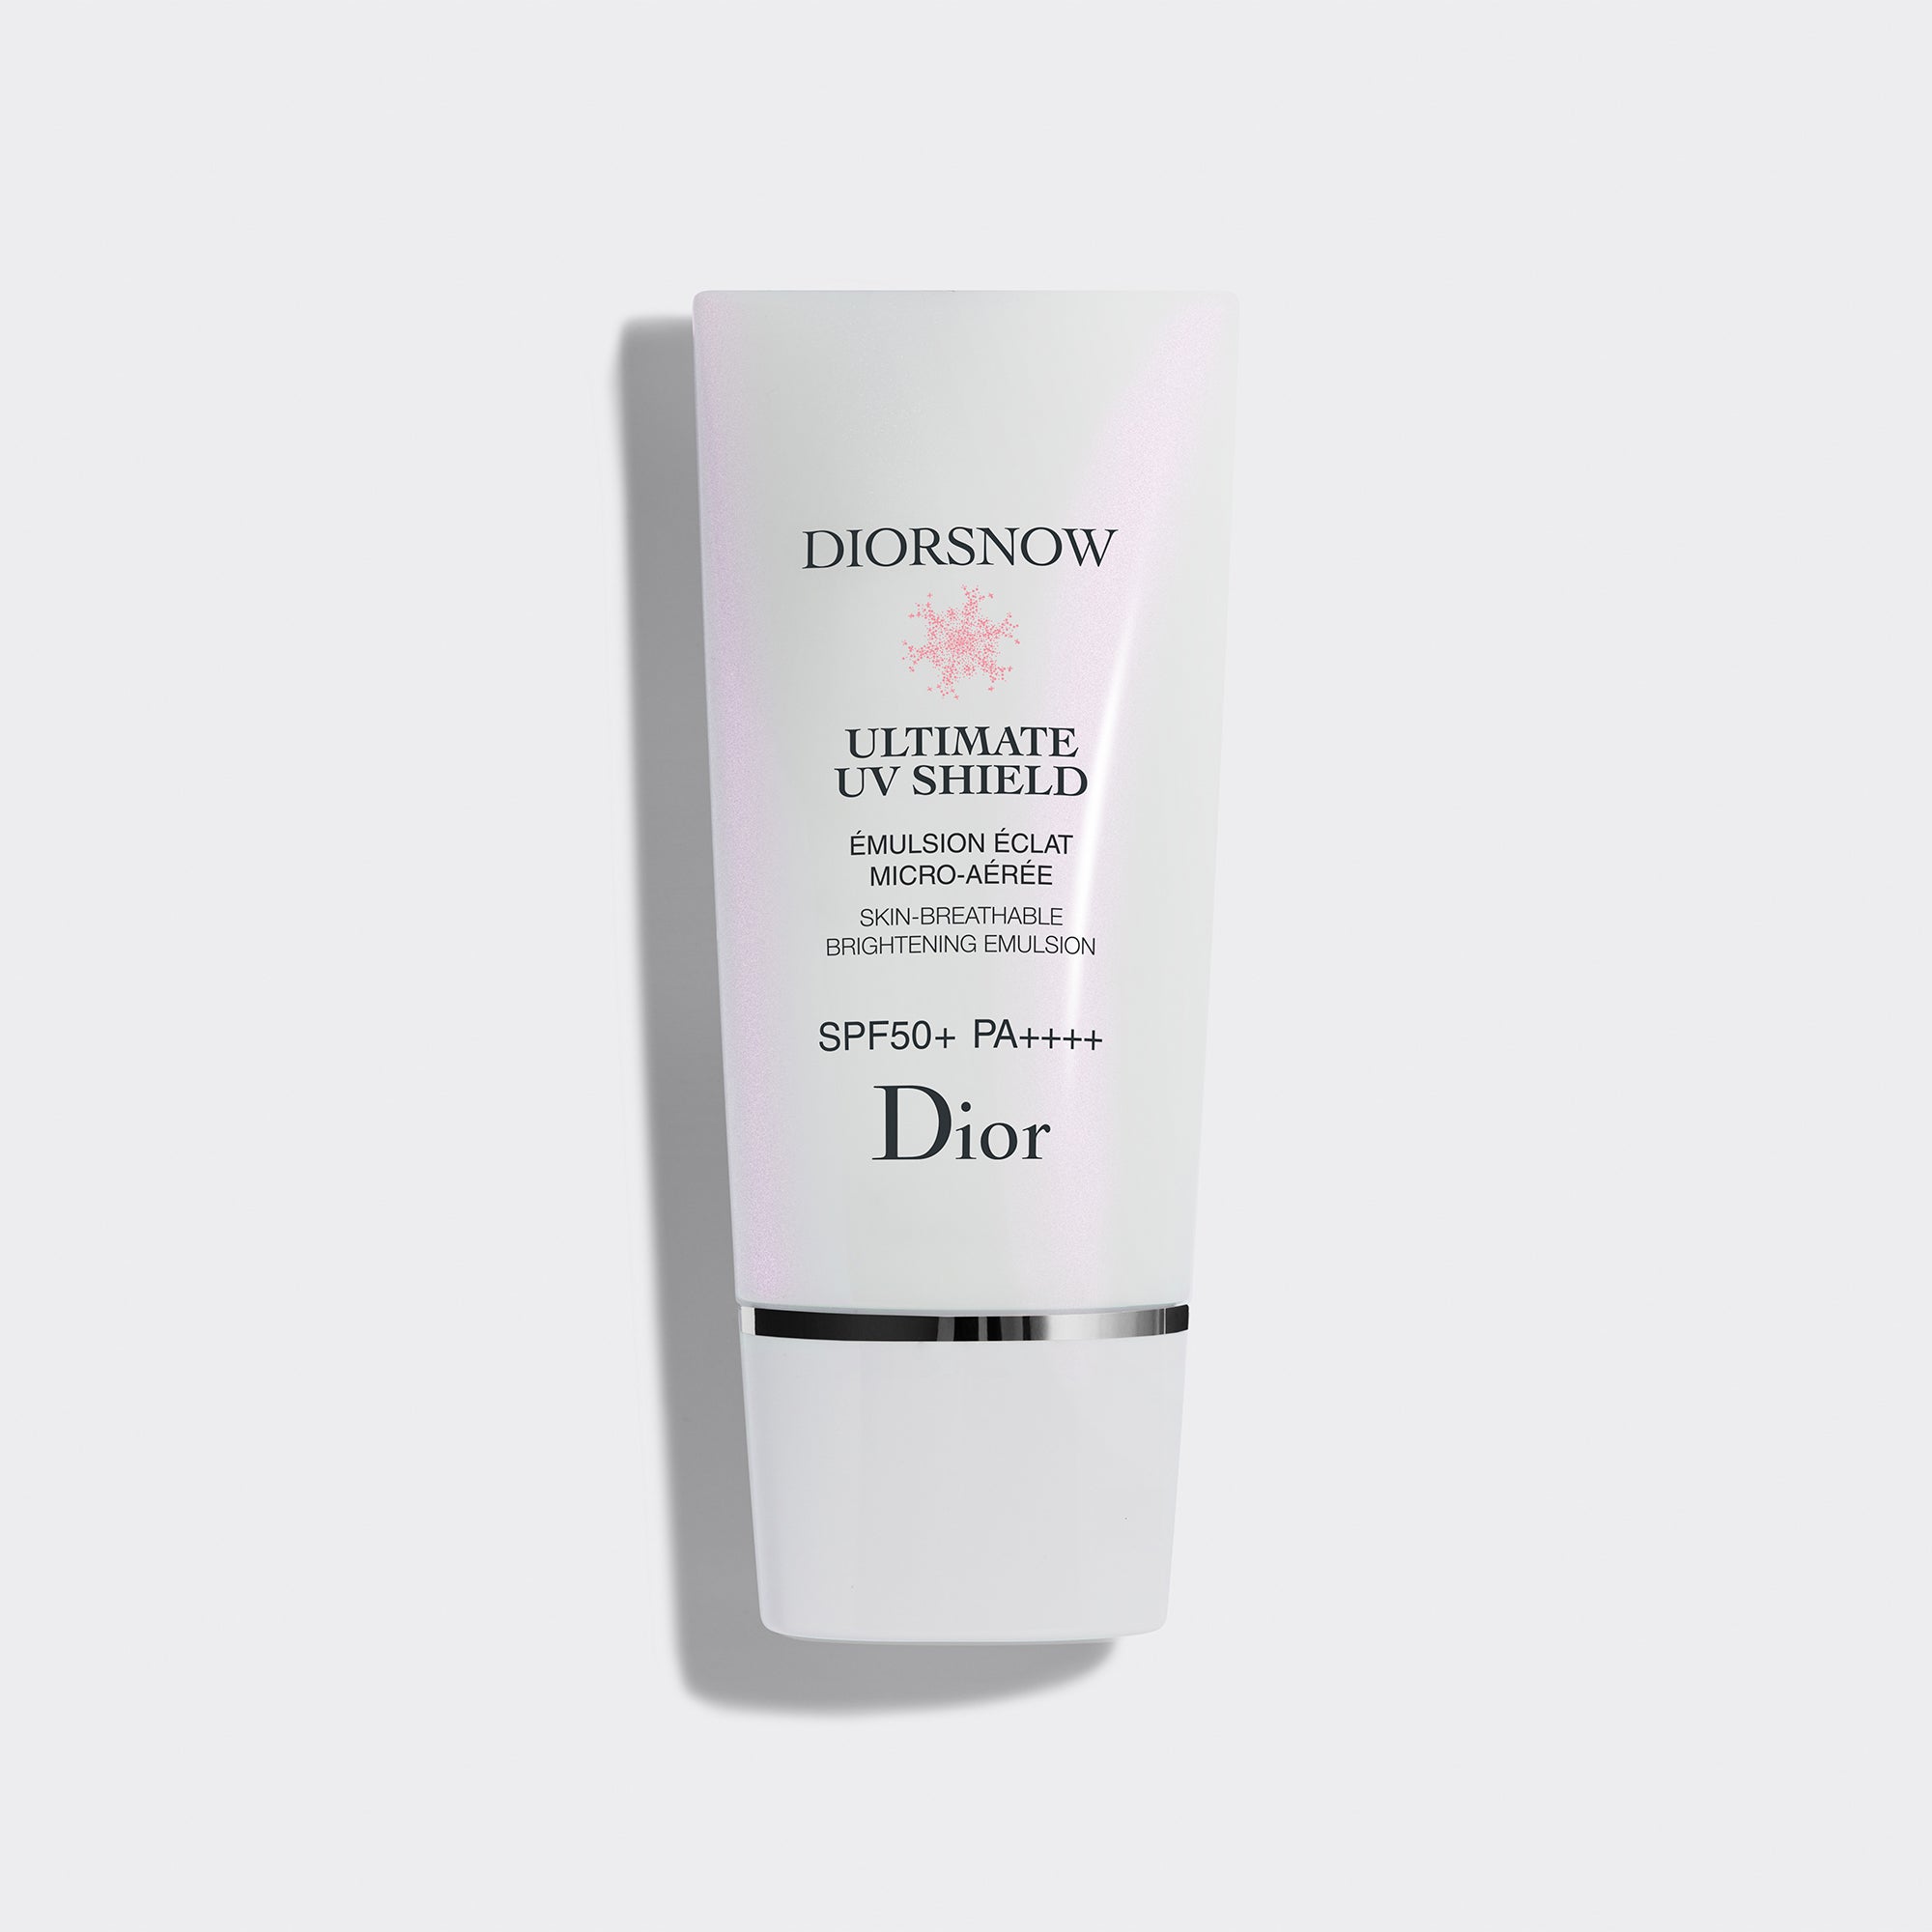 DIORSNOW ~ Skin-breathable brightening emulsion - spf 50+ pa++++